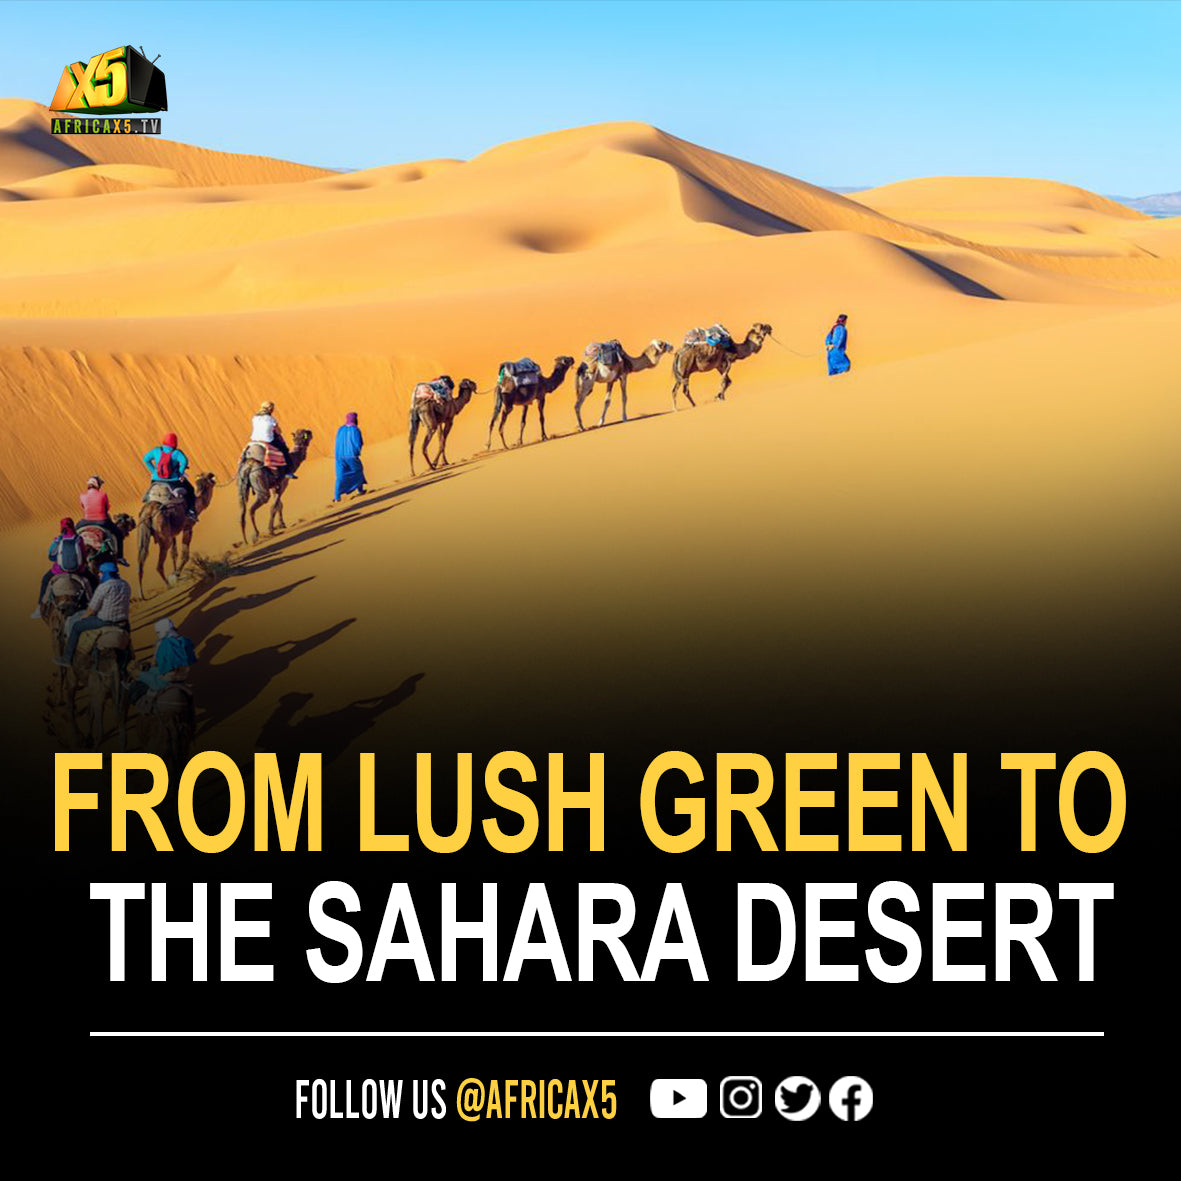 FROM LUSH GREEN TO A DESERT